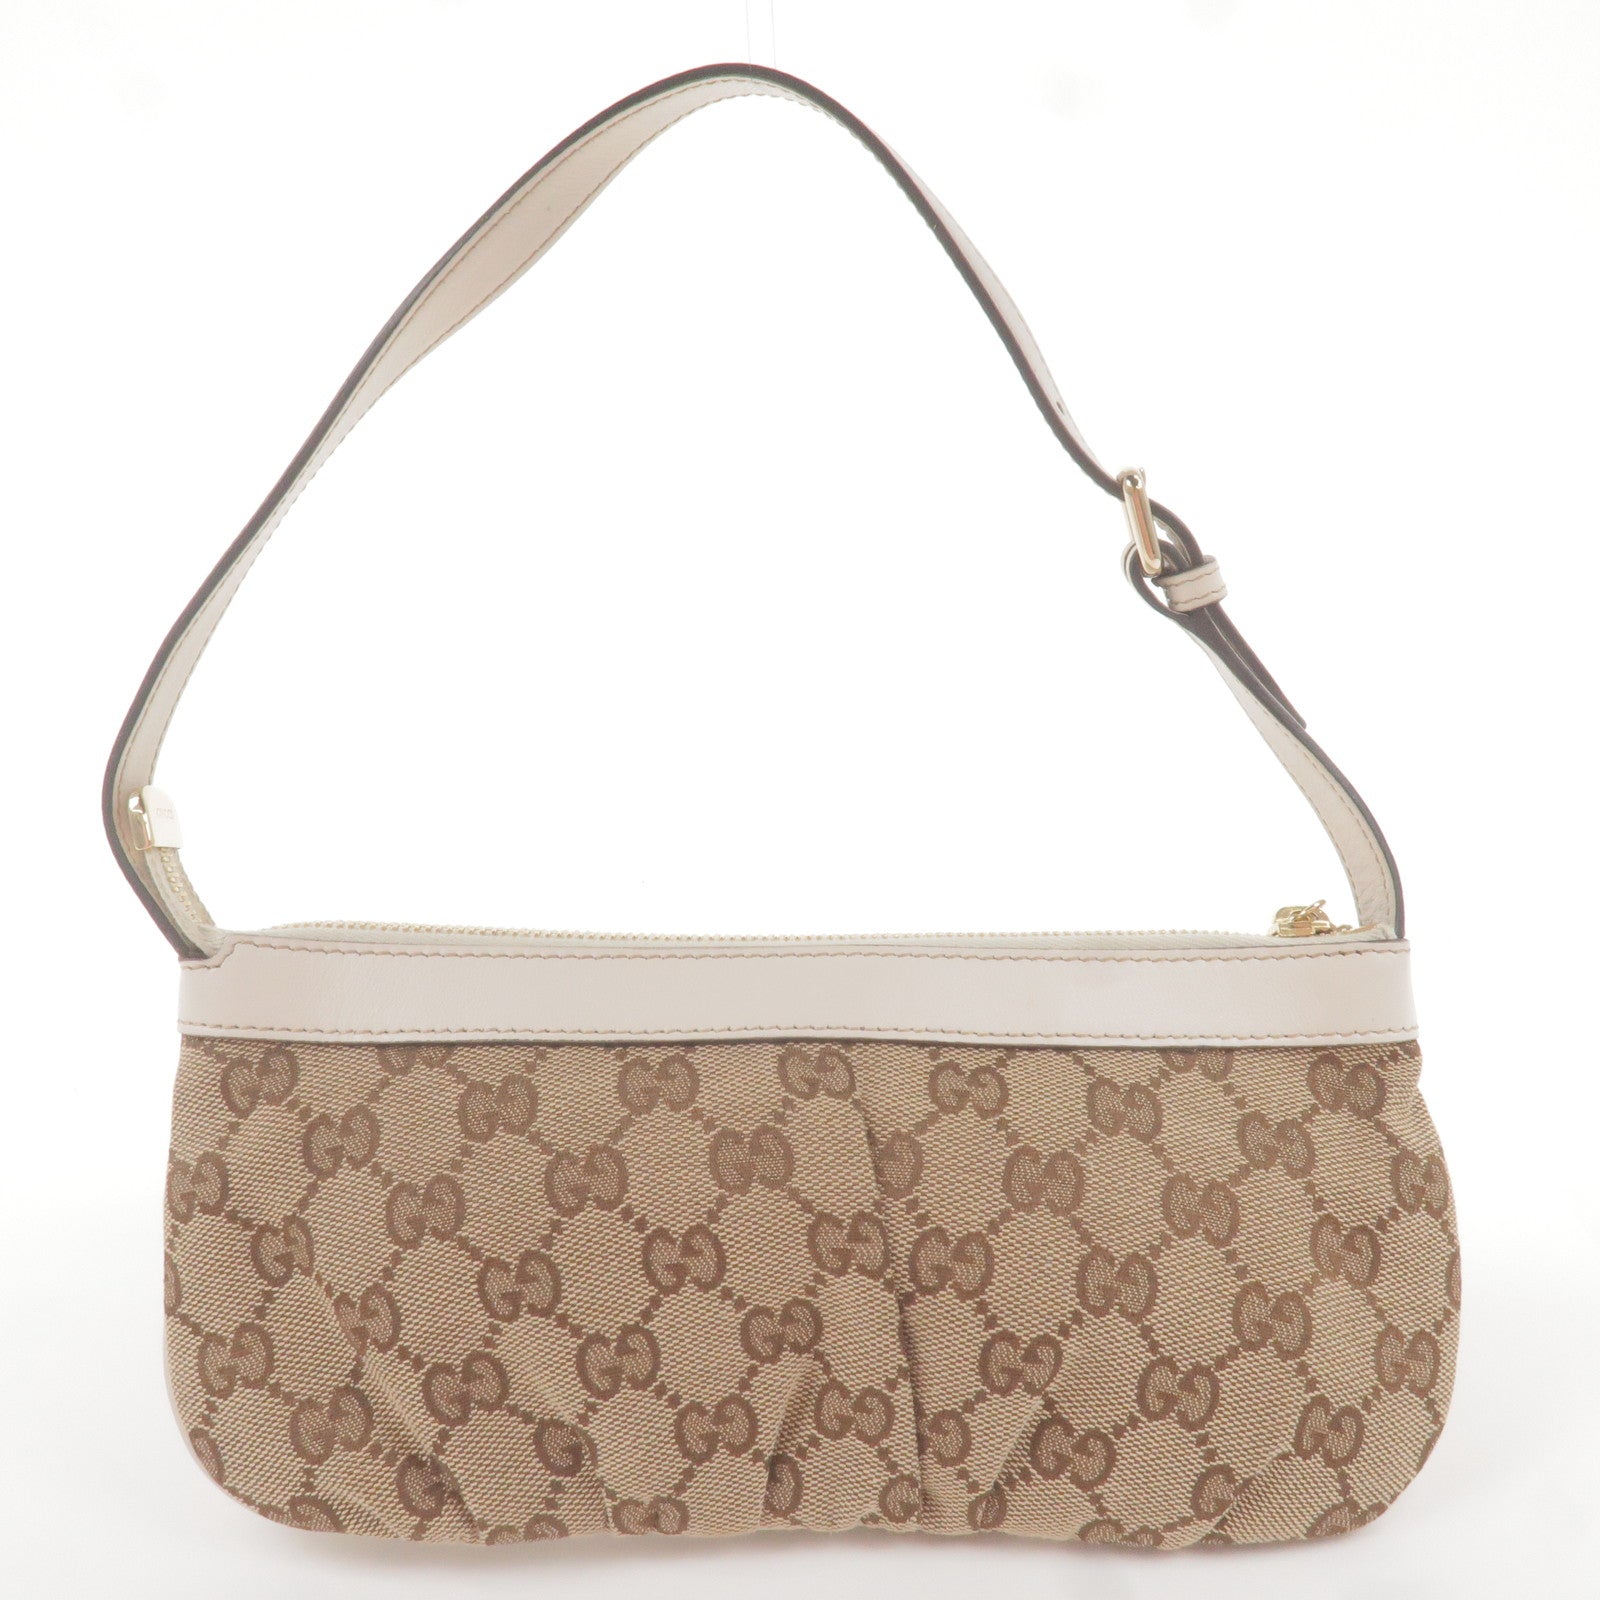 GUCCI-GG-Canvas-Leather-Hand-Bag-Pouch-Beige-Brown-212122 – dct